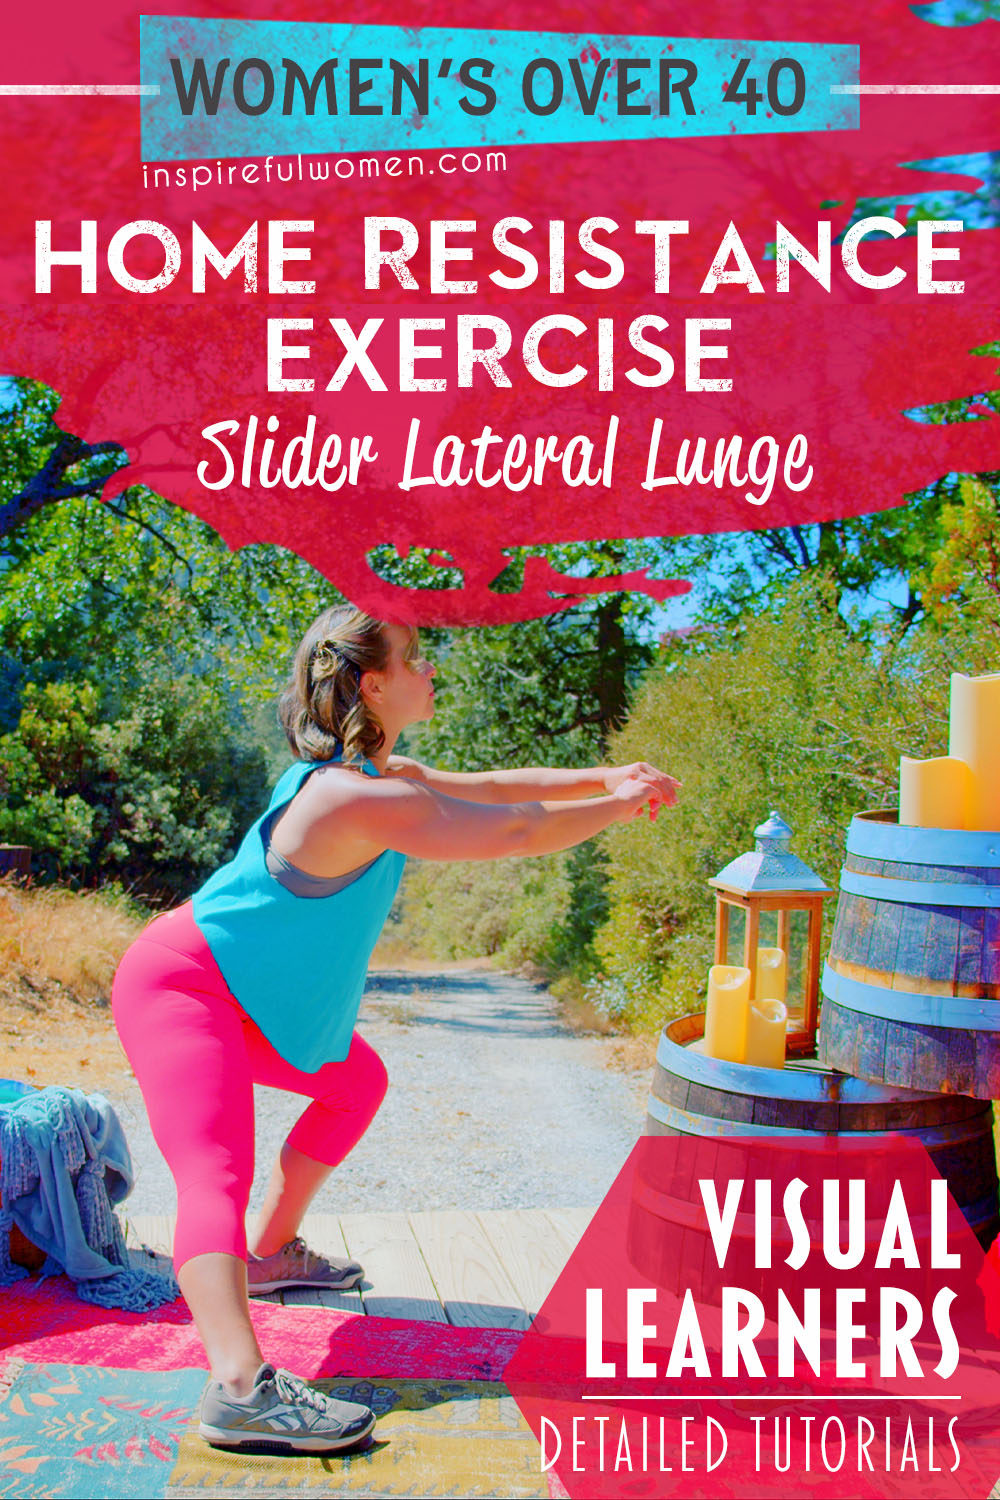 slider-lateral-lunge-squat-alternative-inner-thigh-quadriceps-adductor-glutes-exercise-women-over-40